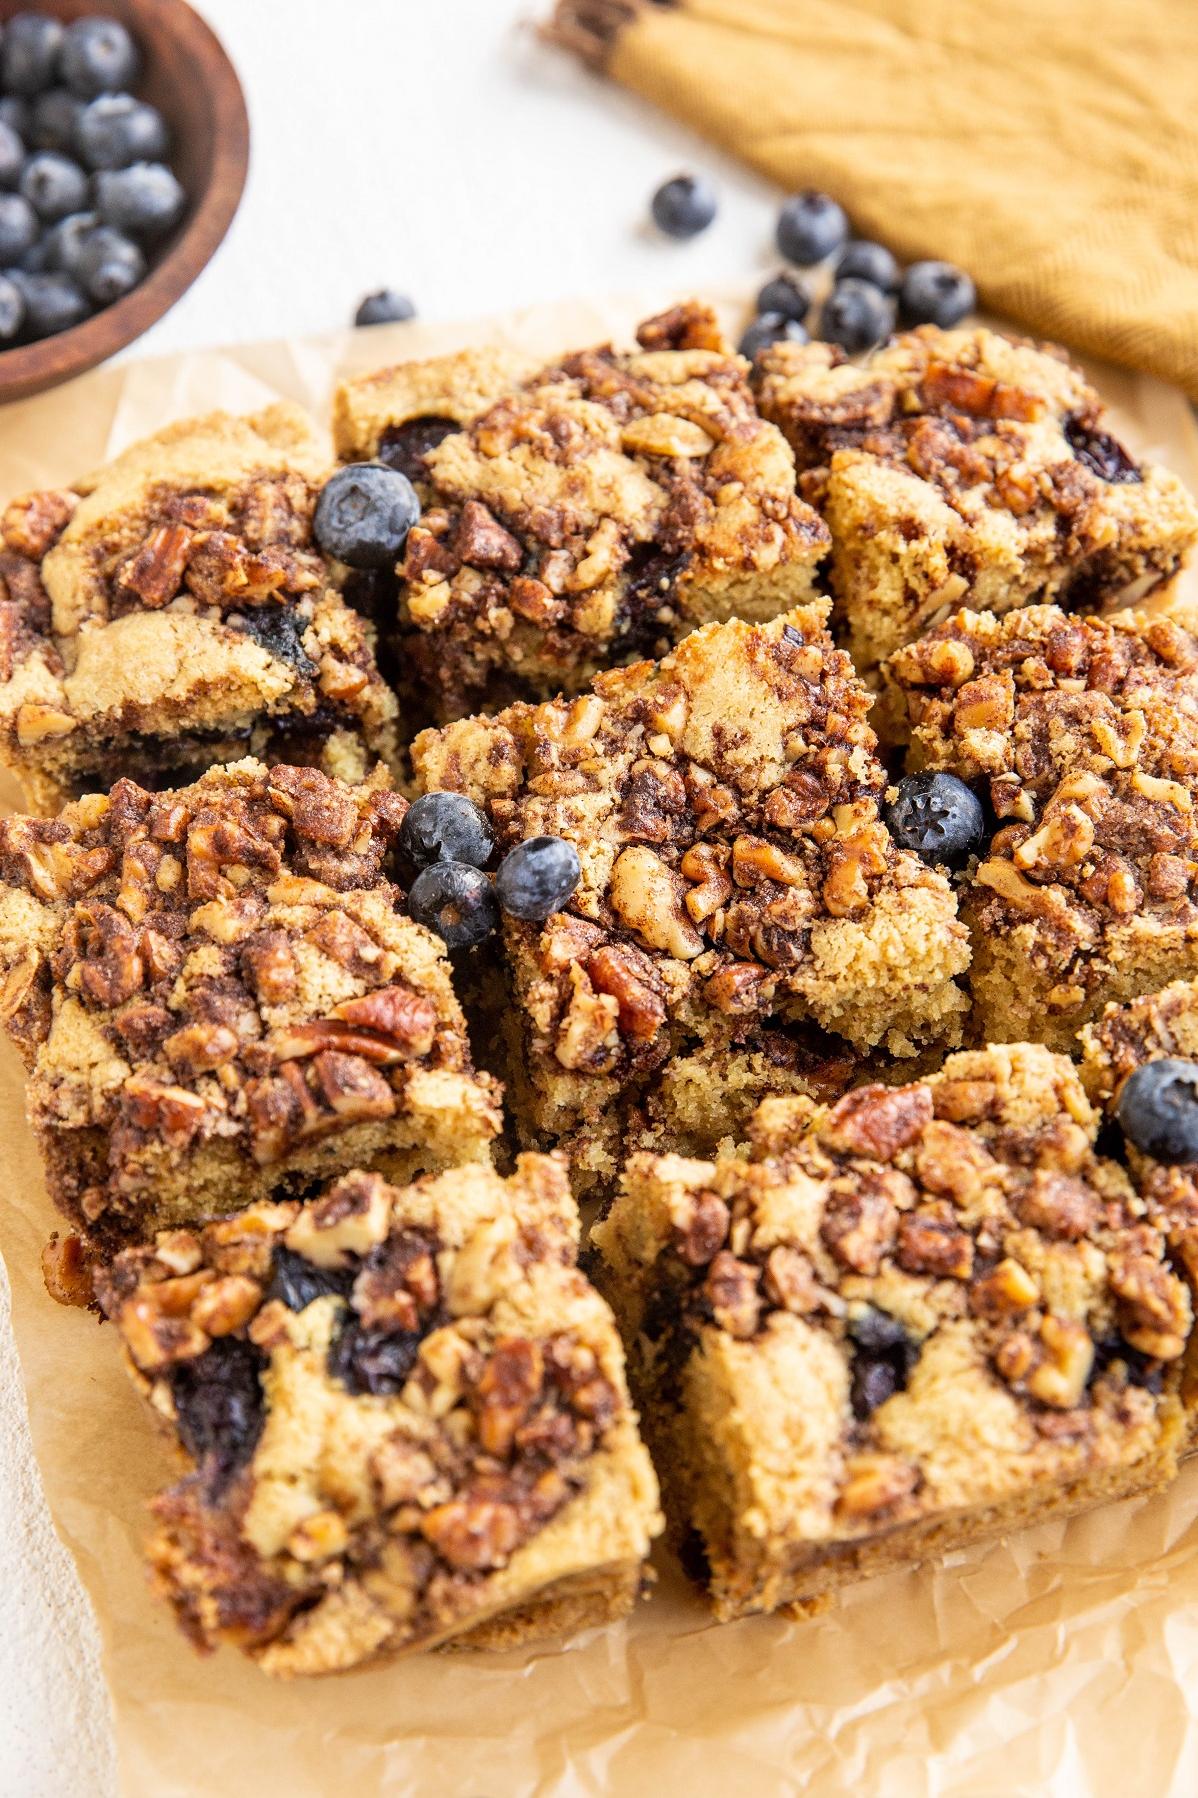  Breakfast will never be the same with a slice of this Blueberry Granola Coffee Cake